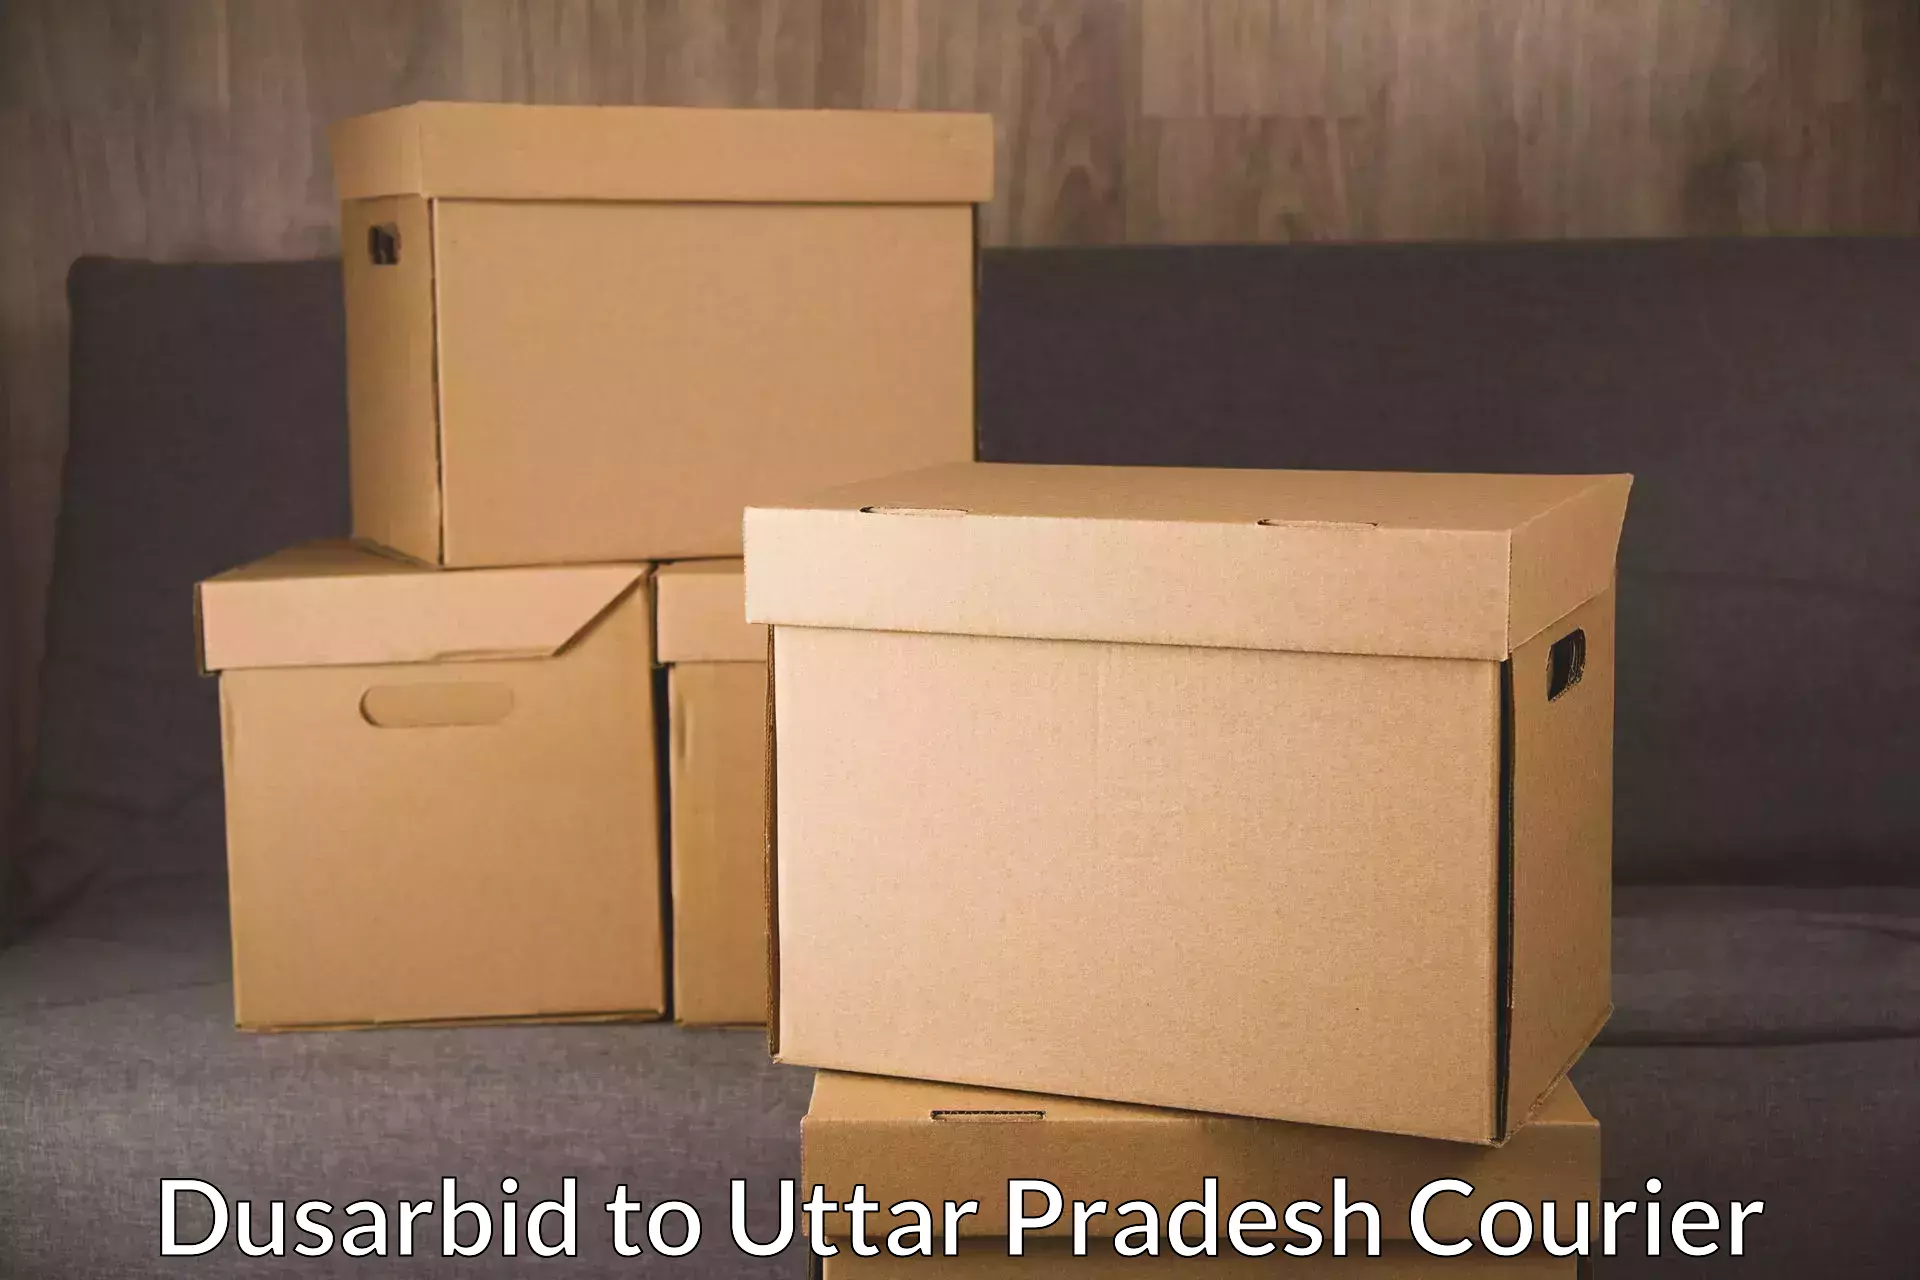 Express package delivery Dusarbid to Fatehabad Agra